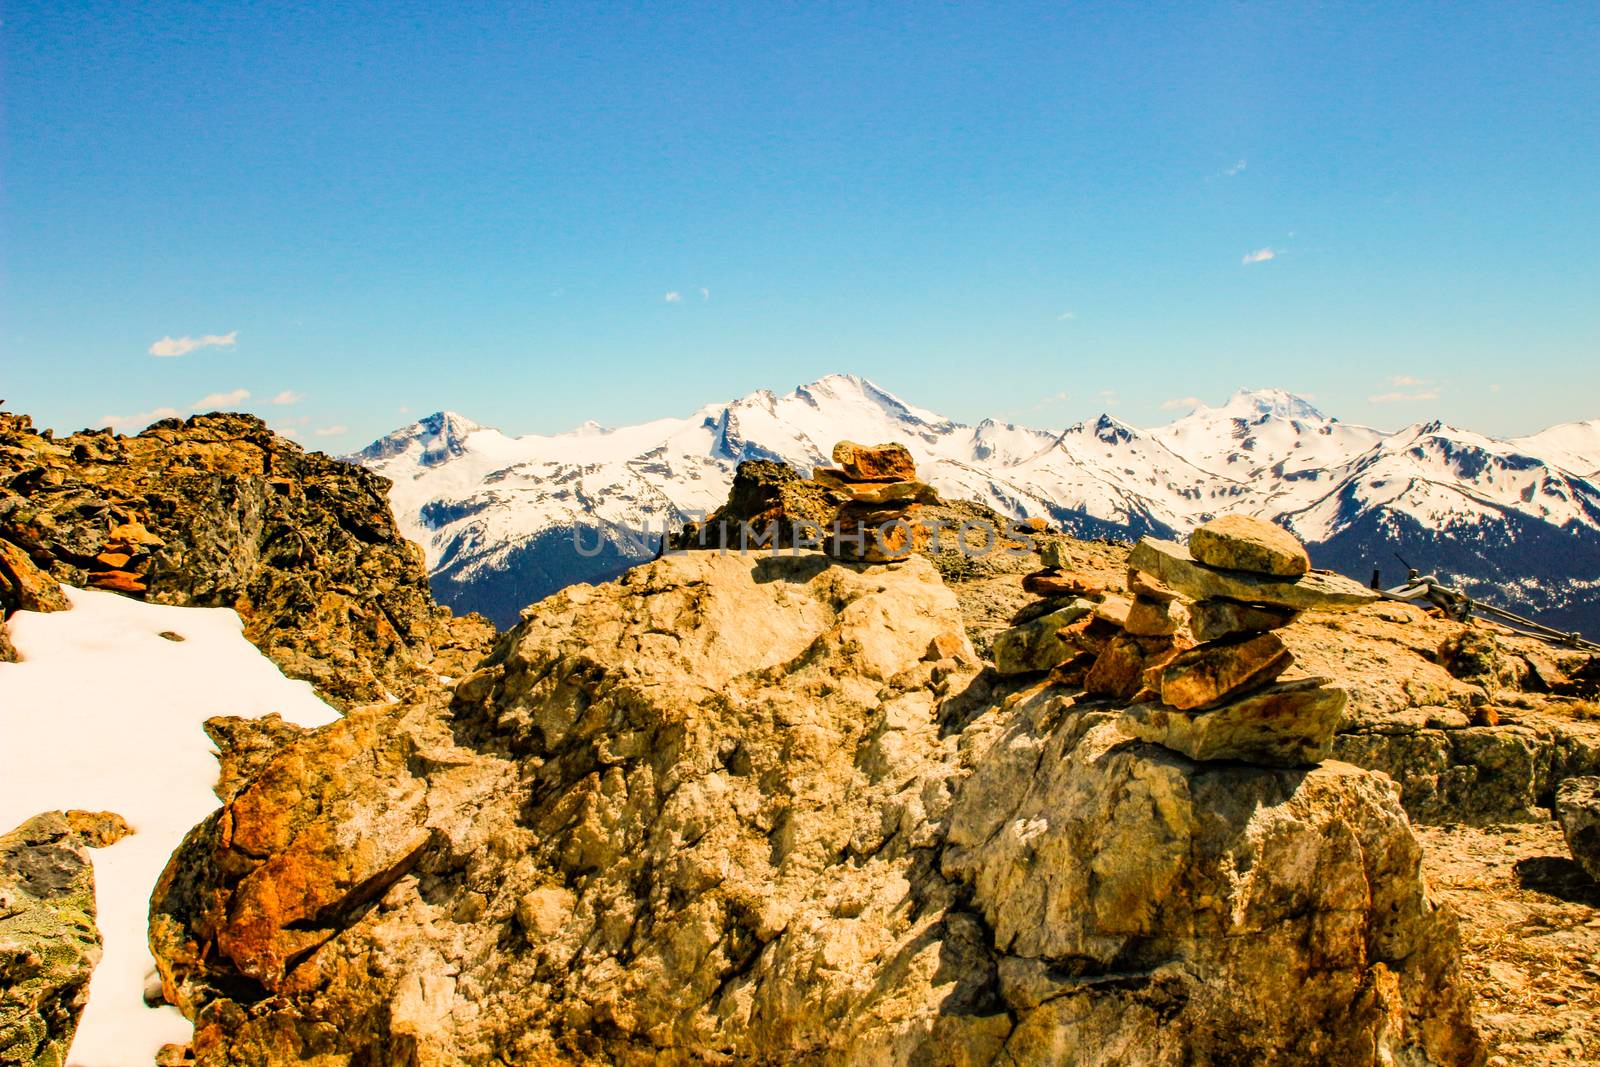 Blackcomb Mountain - Whister, Bc, Canada. Canadian tourism industry